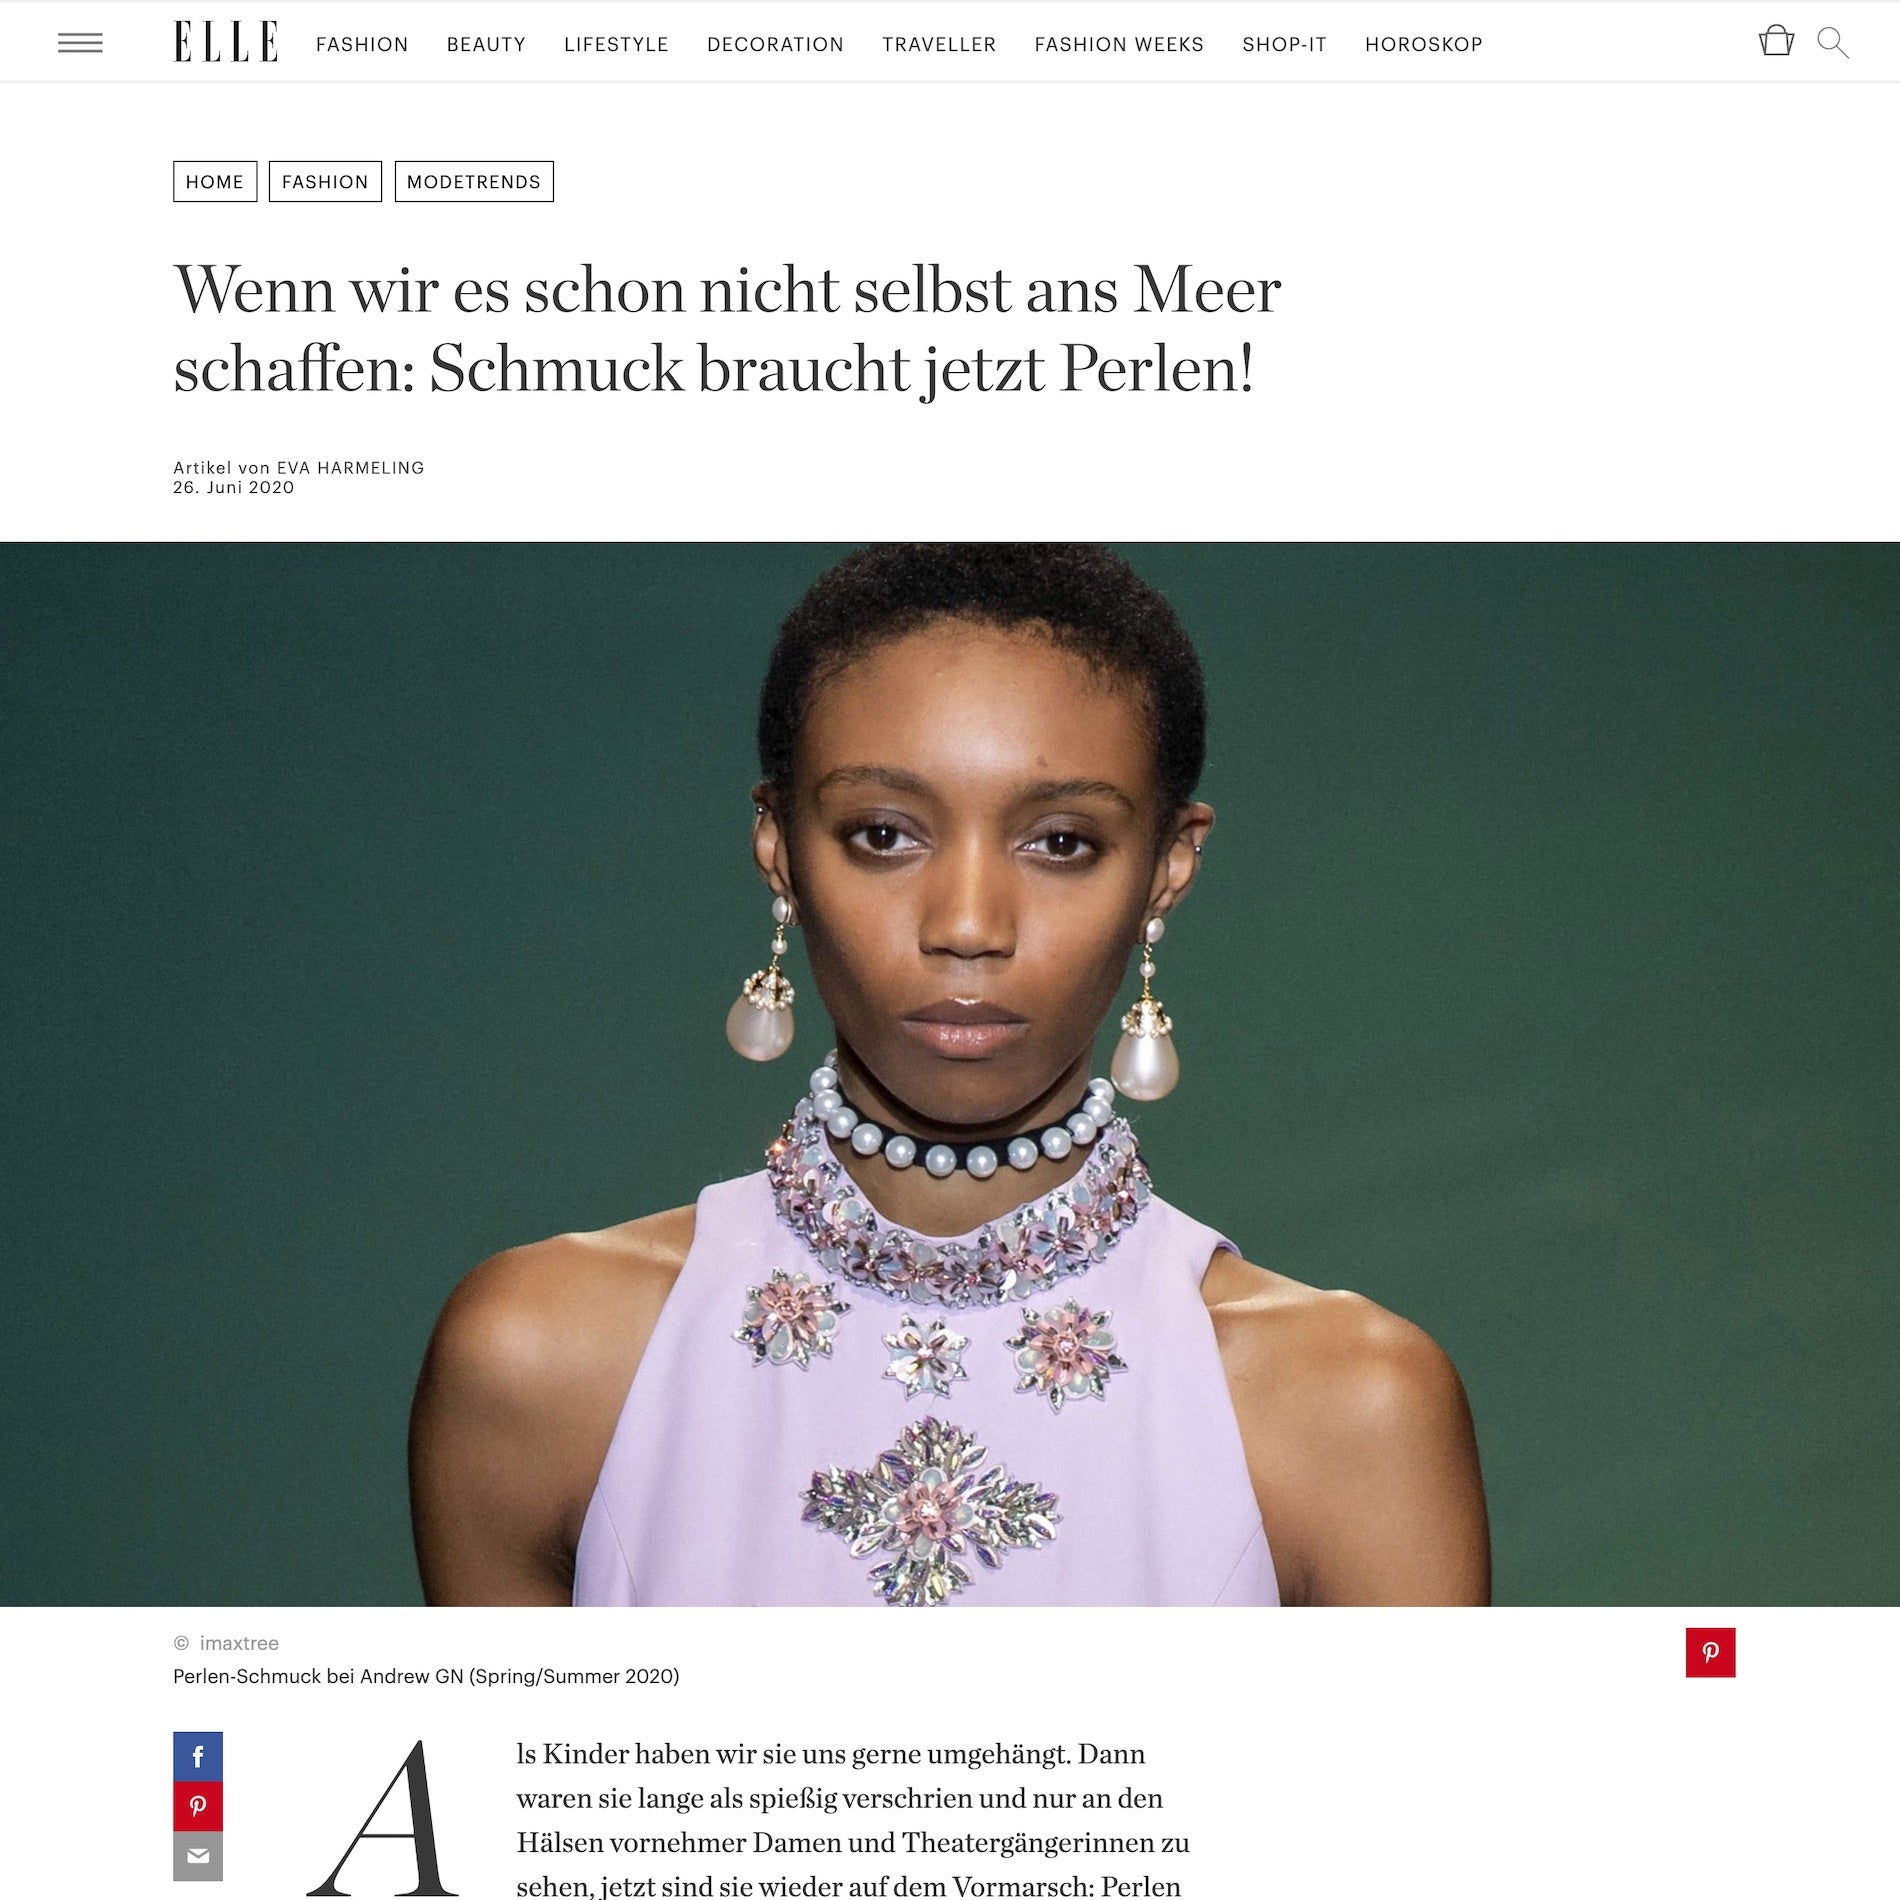 Elle Germany: Mermaid Stories jewelry is featured in this article about pearl trends